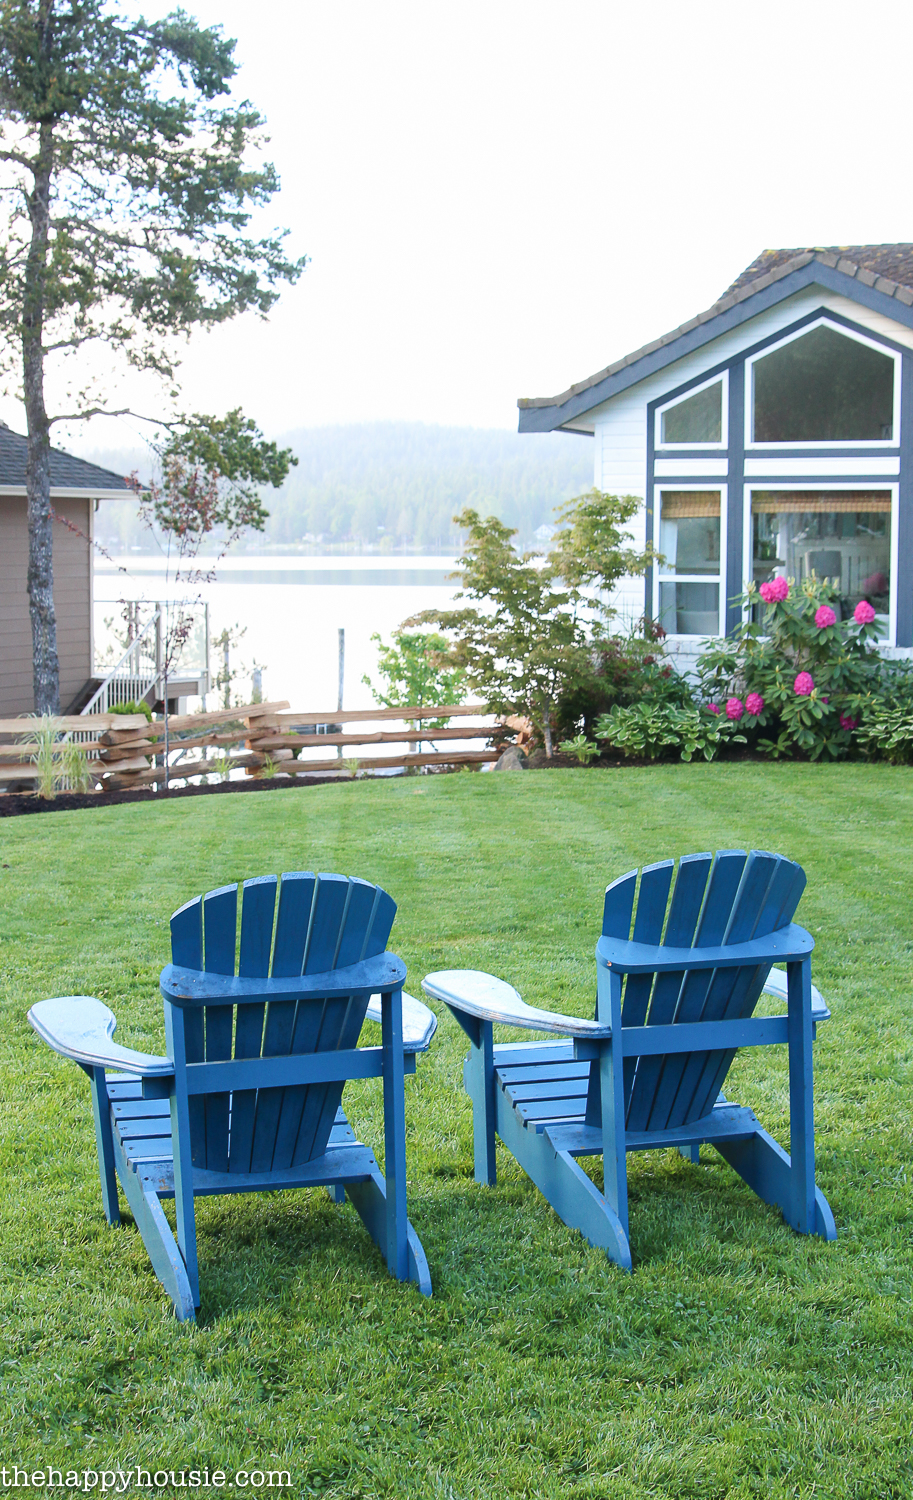 A view of the lake from the two blue chairs.